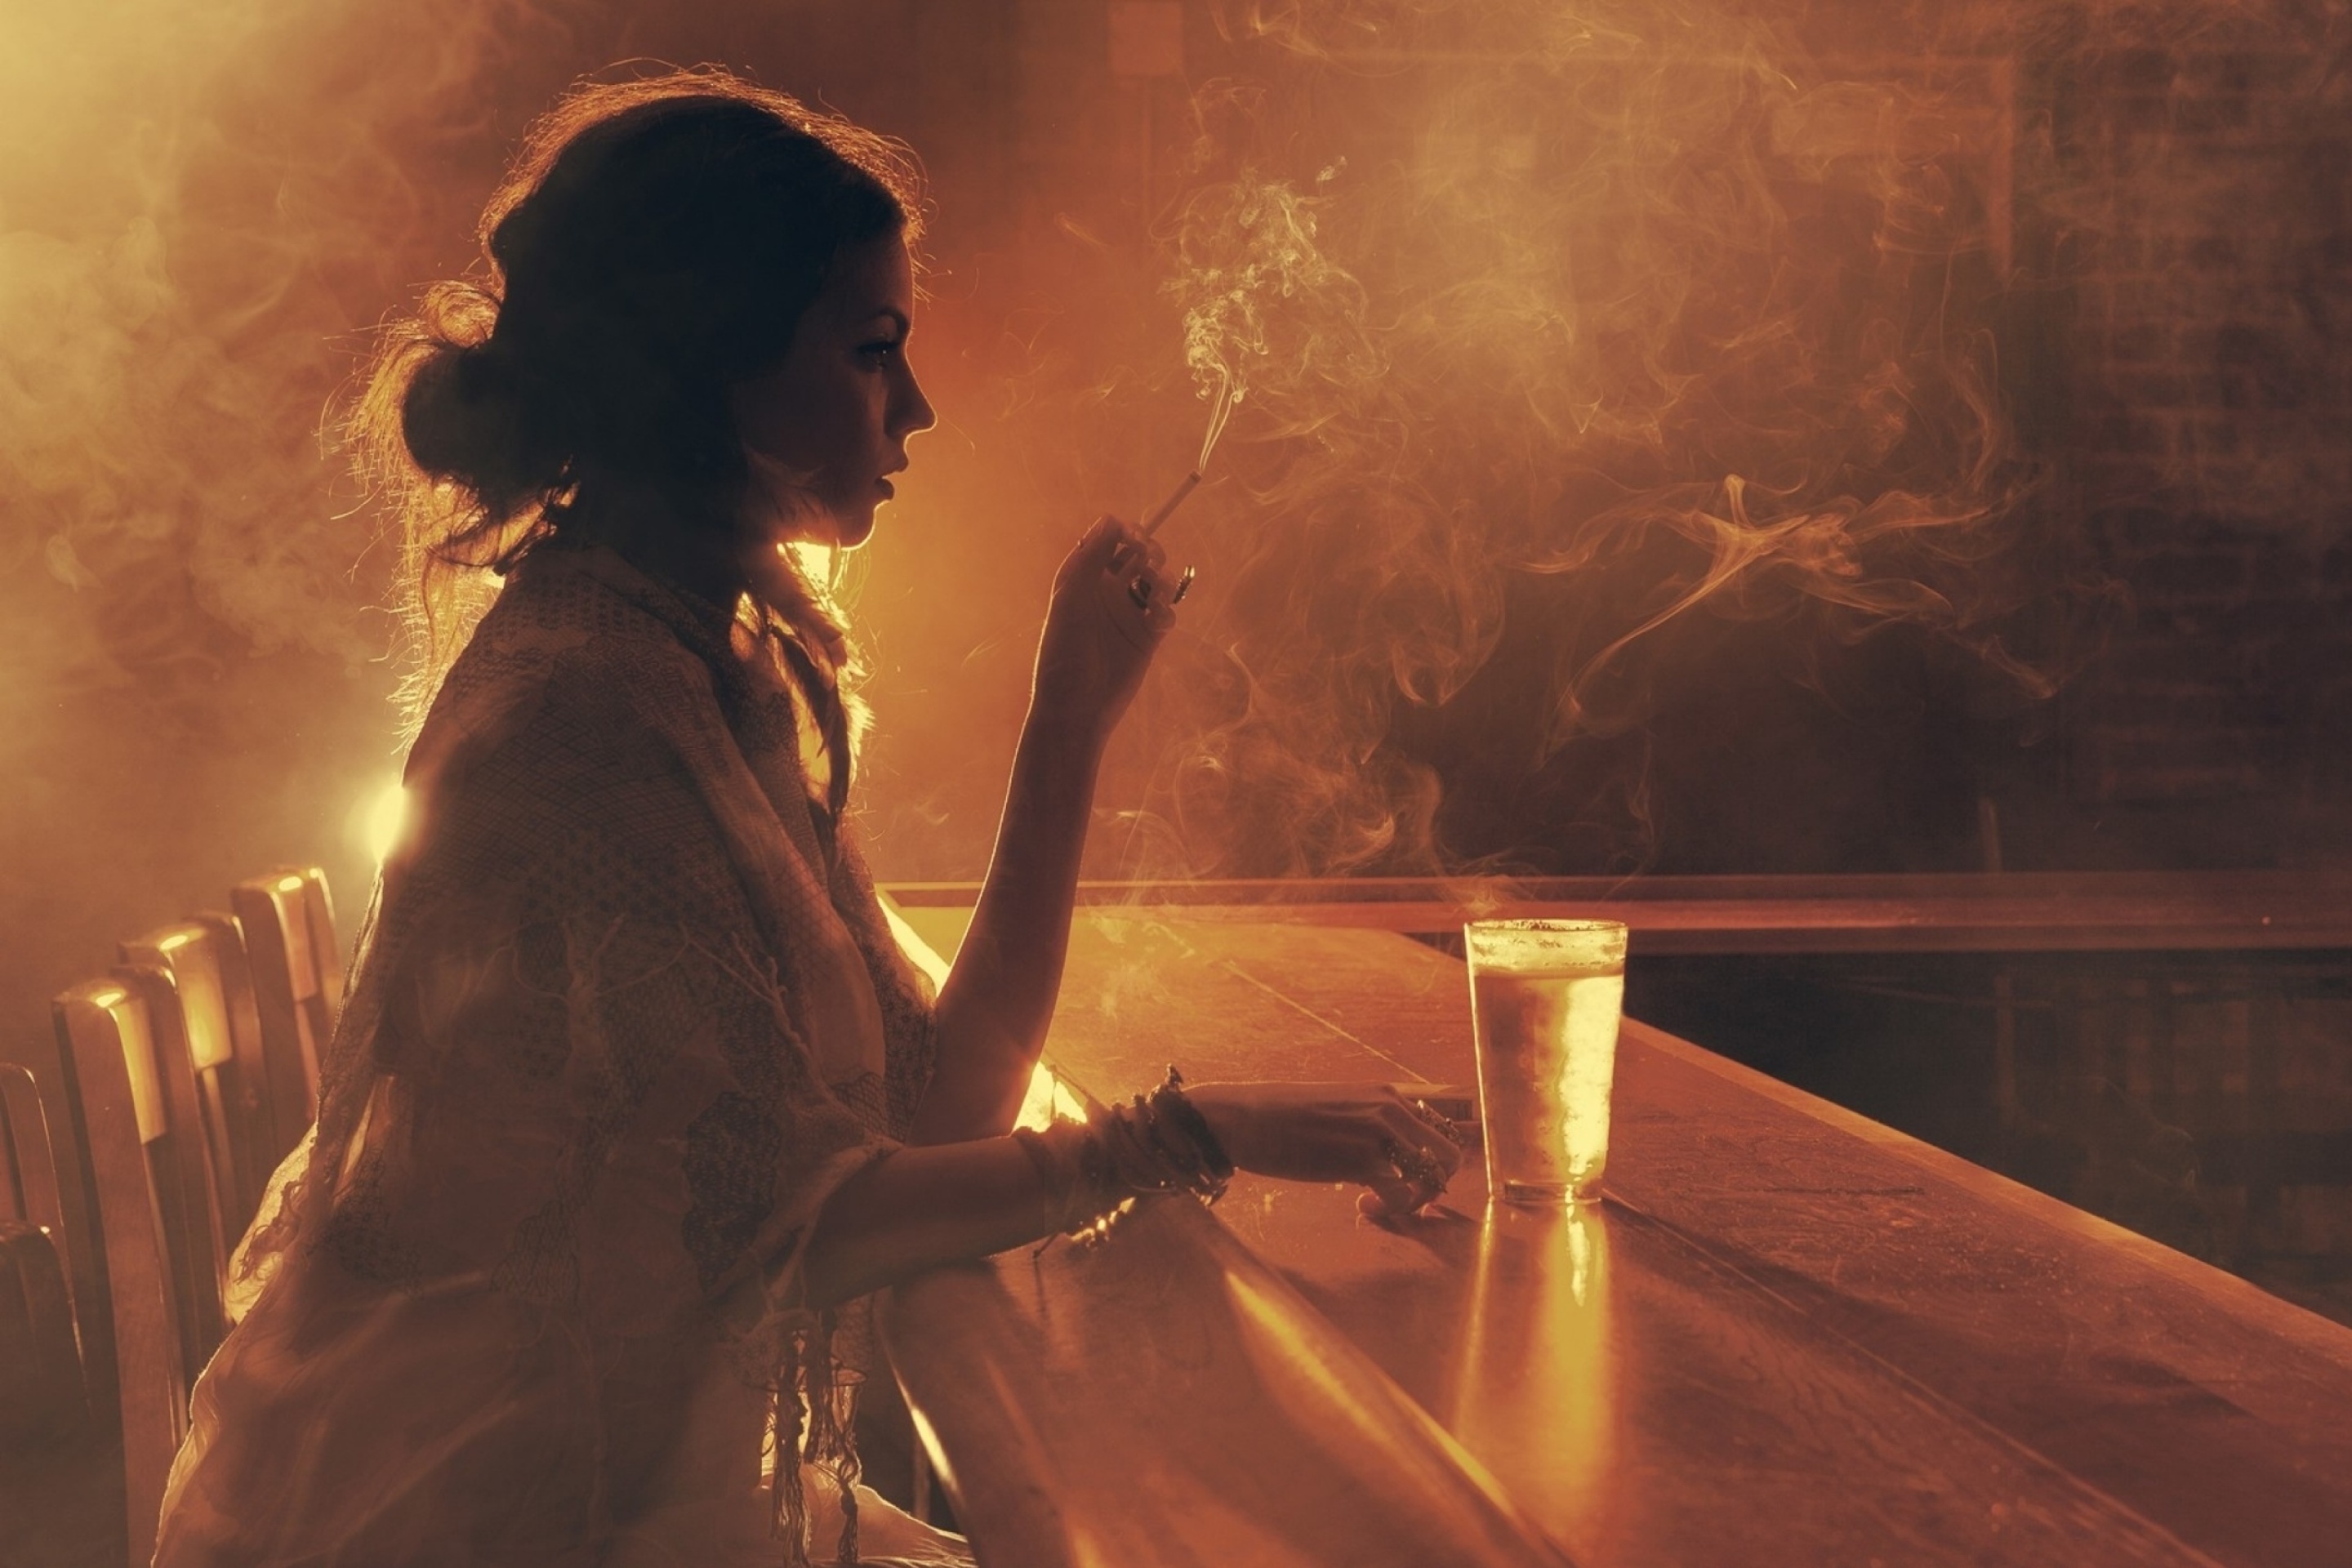 Sad girl with cigarette in bar wallpaper 2880x1920